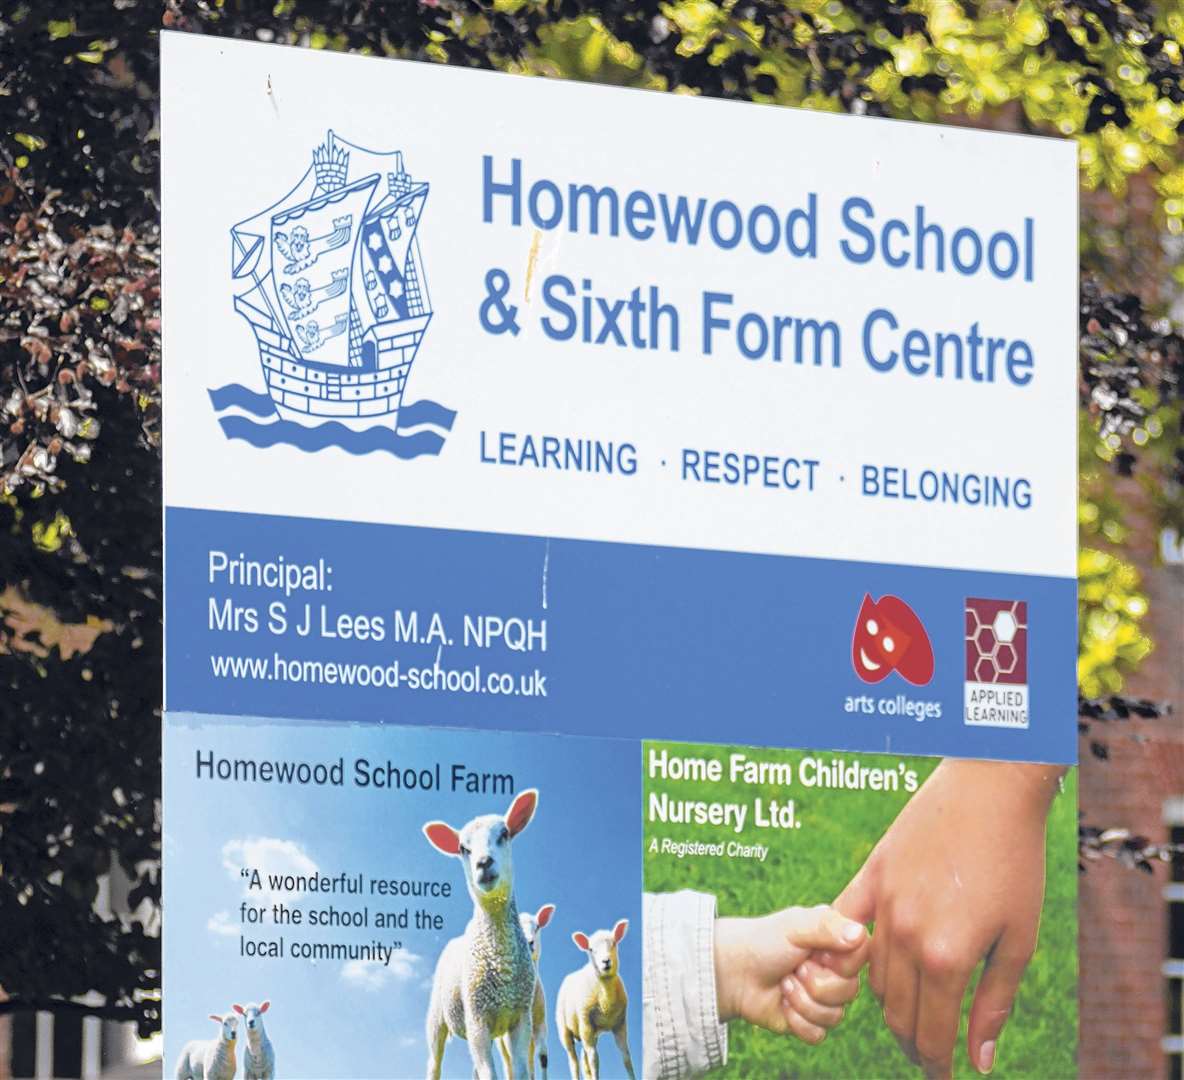 Homewood School has, like many other schools in the country, been impacted by the coronavirus